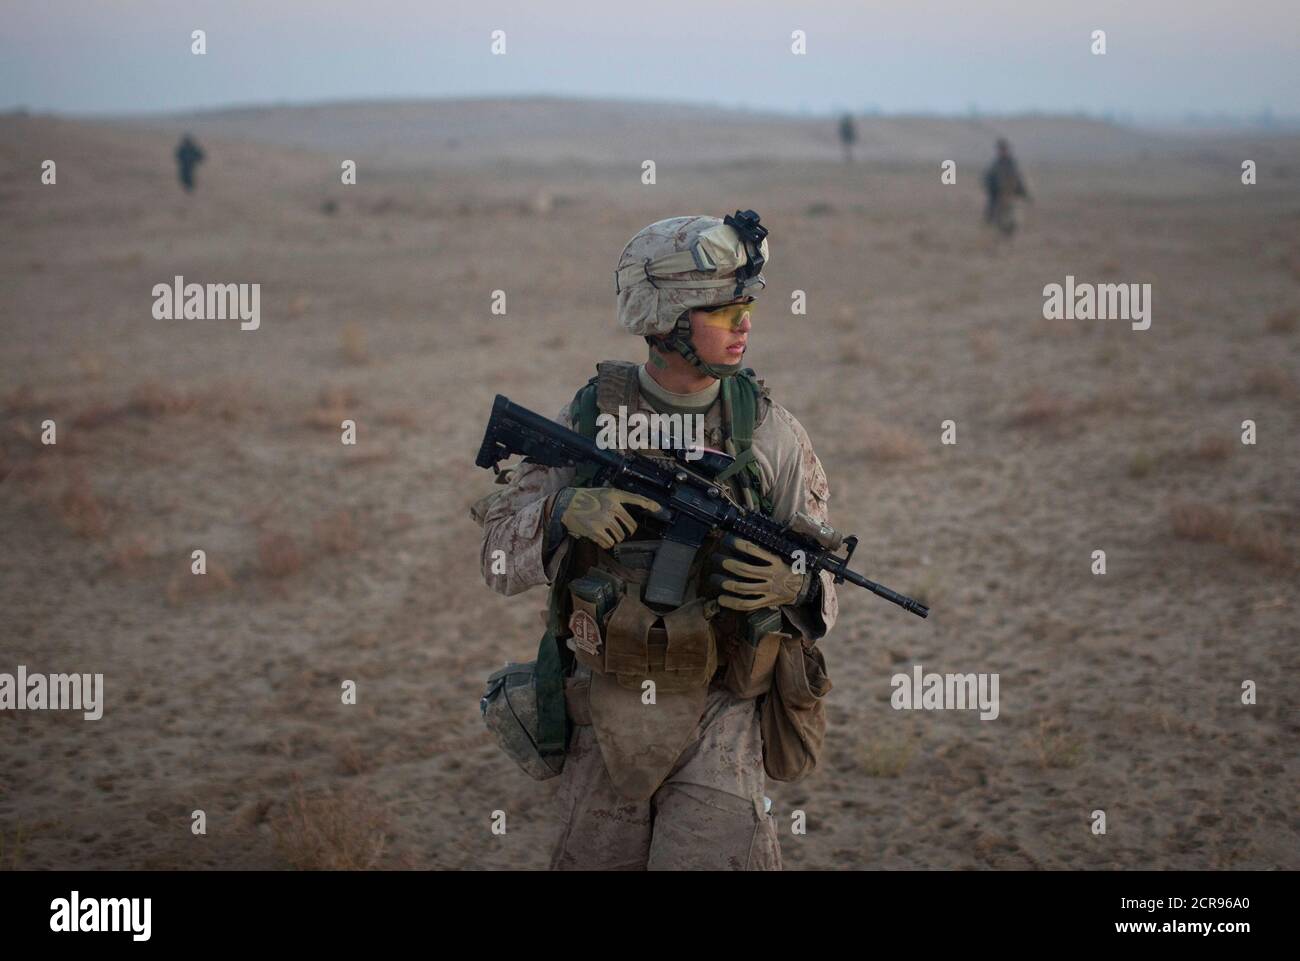 A U.S. Marine attached to the 2nd Battalion 2nd Marines from Camp Lejeune, North Carolina, takes part in an operation in the Garmsir district of Helmand Province December 23, 2009.   REUTERS/Adrees Latif   (AFGHANISTAN - Tags: POLITICS MILITARY) Stock Photo